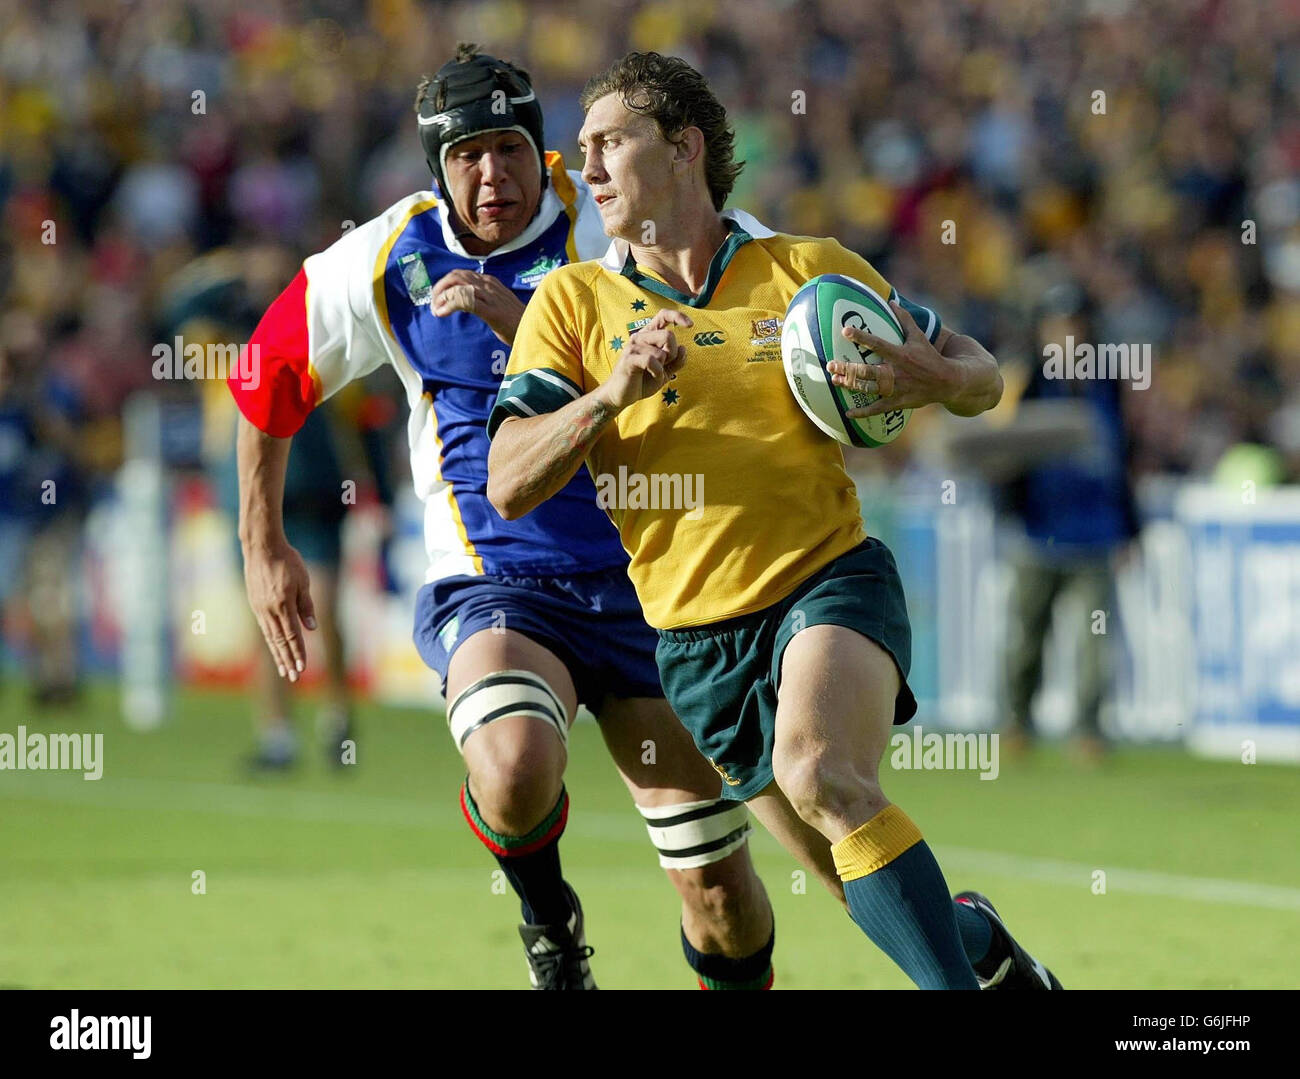 Matt Rogers beats the cover of Namibia's Jurgens van Lill to score Australia's 21st try in thier 142-0 victory in the Rugby World Cup Pool A match at the Oval Stadium, Adelaide. Stock Photo